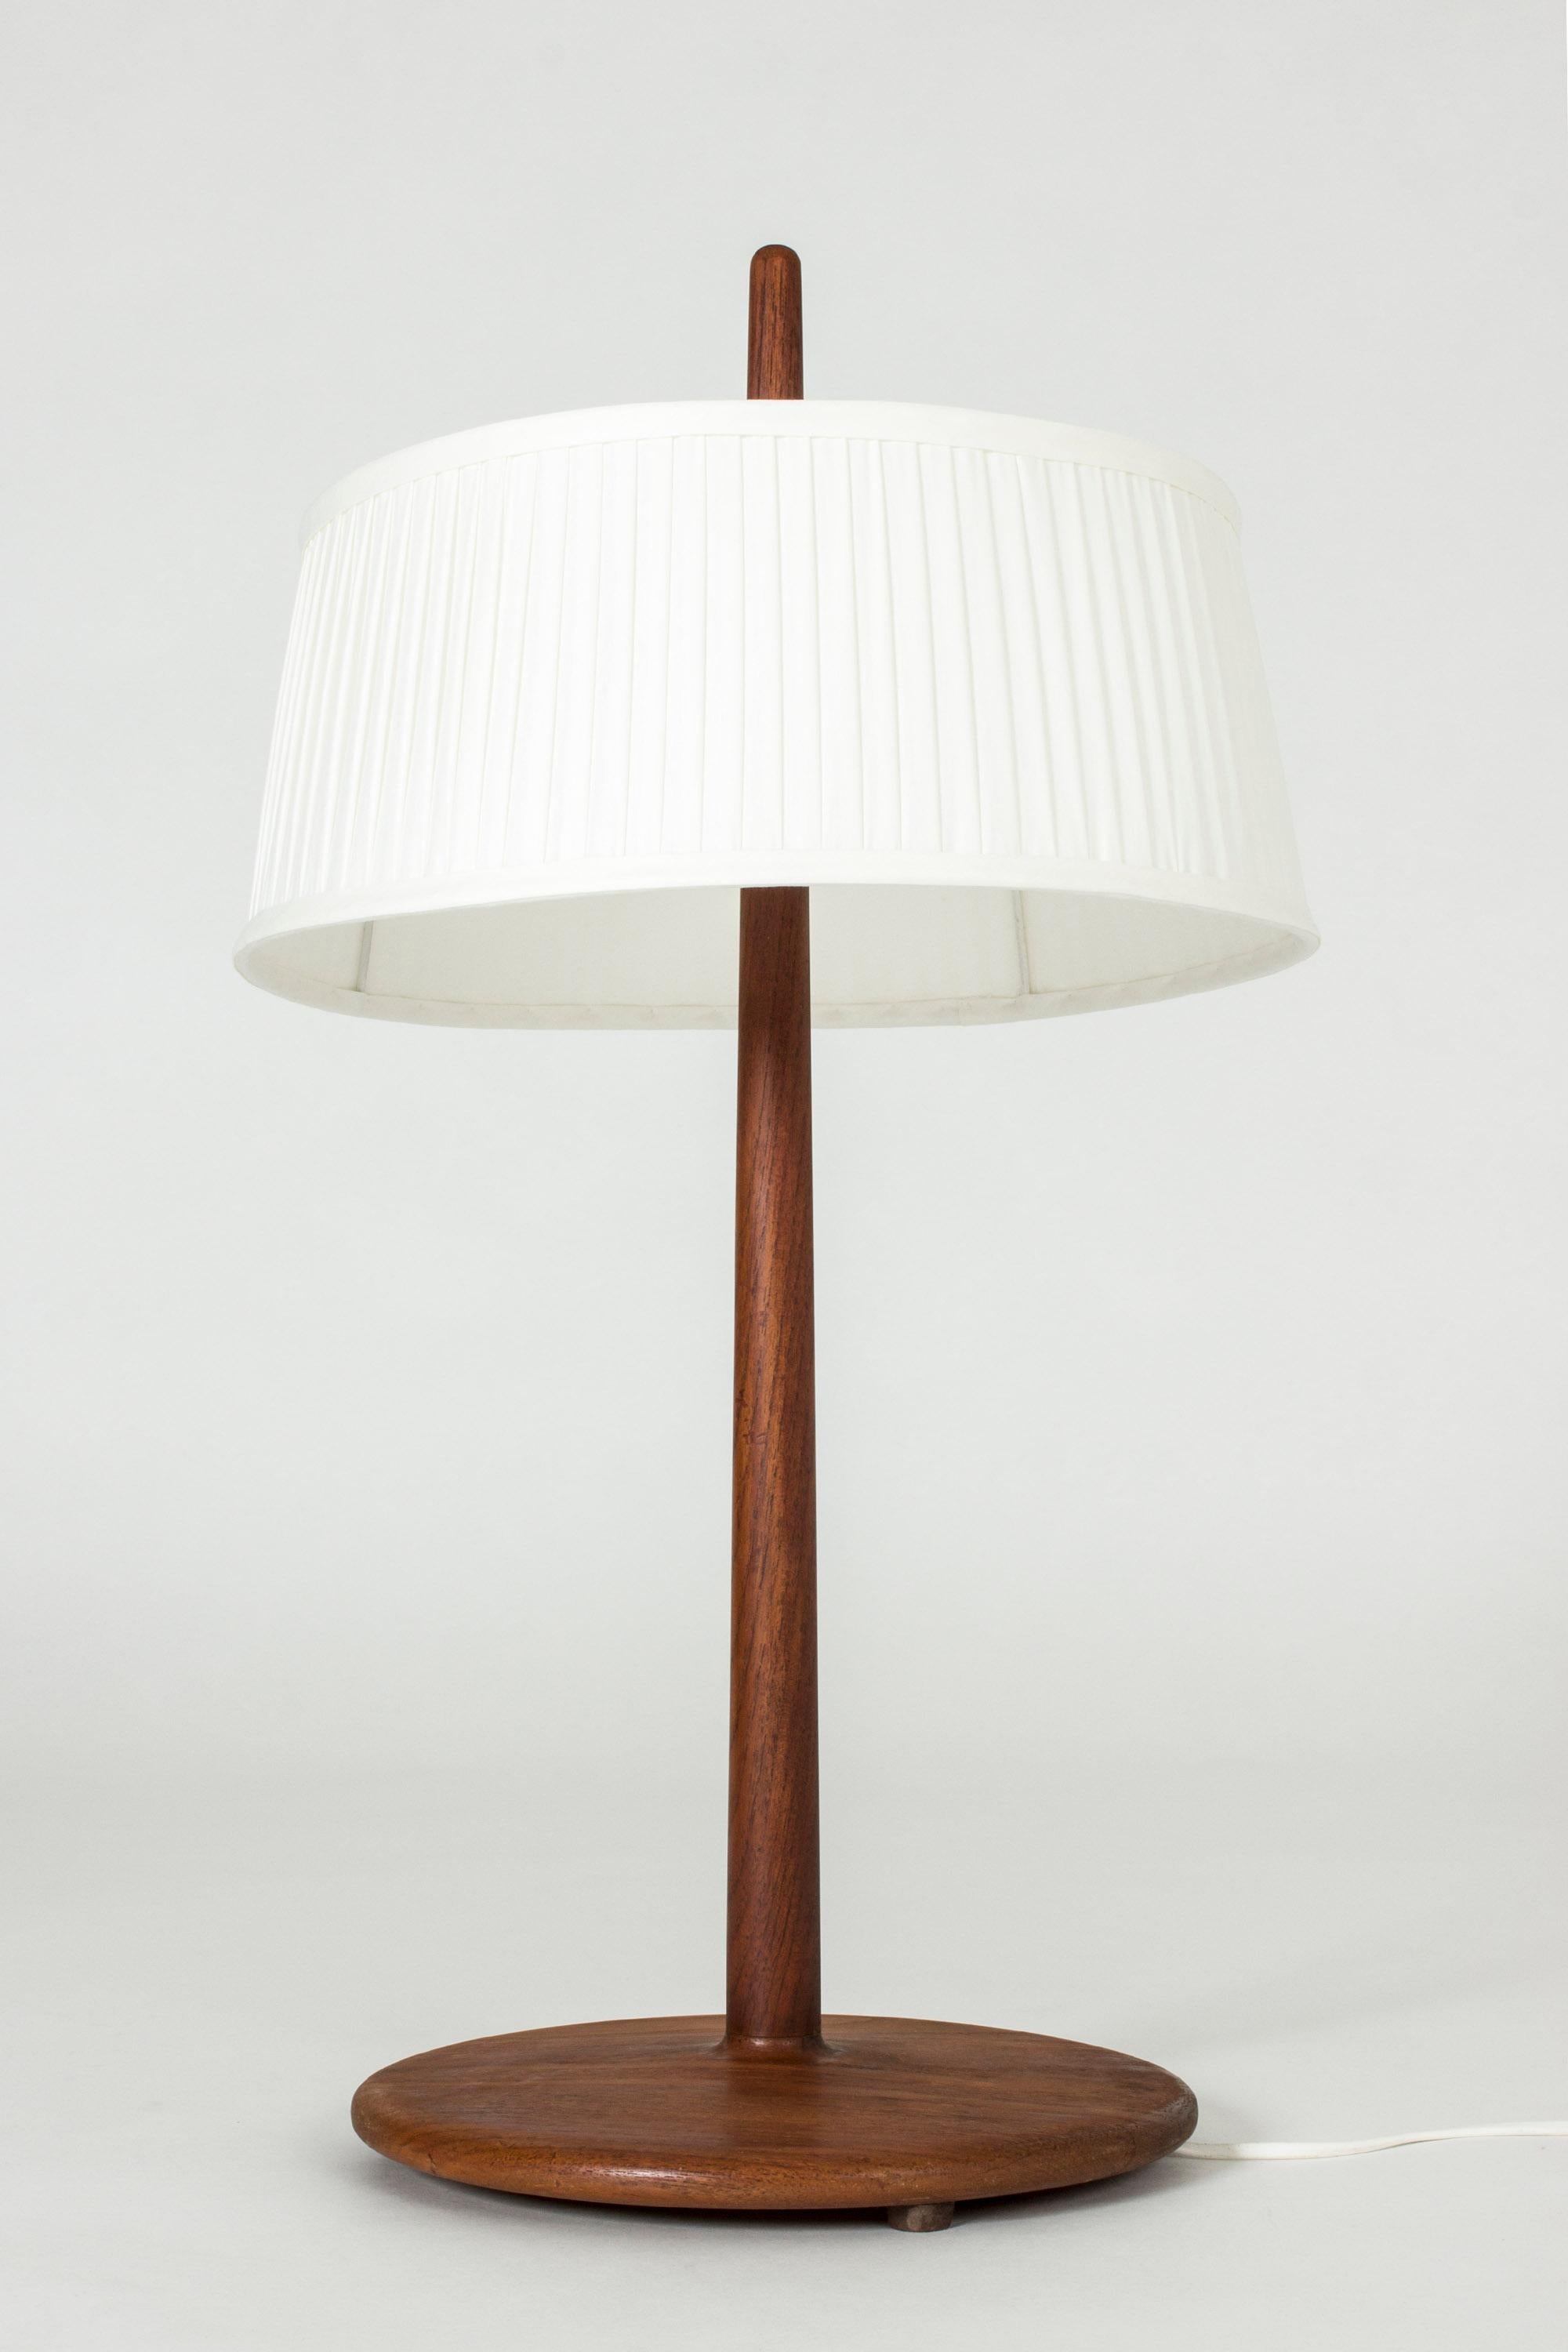 Cool table lamp by Alf Svensson, with a teak base and stem, where the tip of the stem shoots up out of the top of the open shade. Very nice, smooth teak in a streamlined shape.